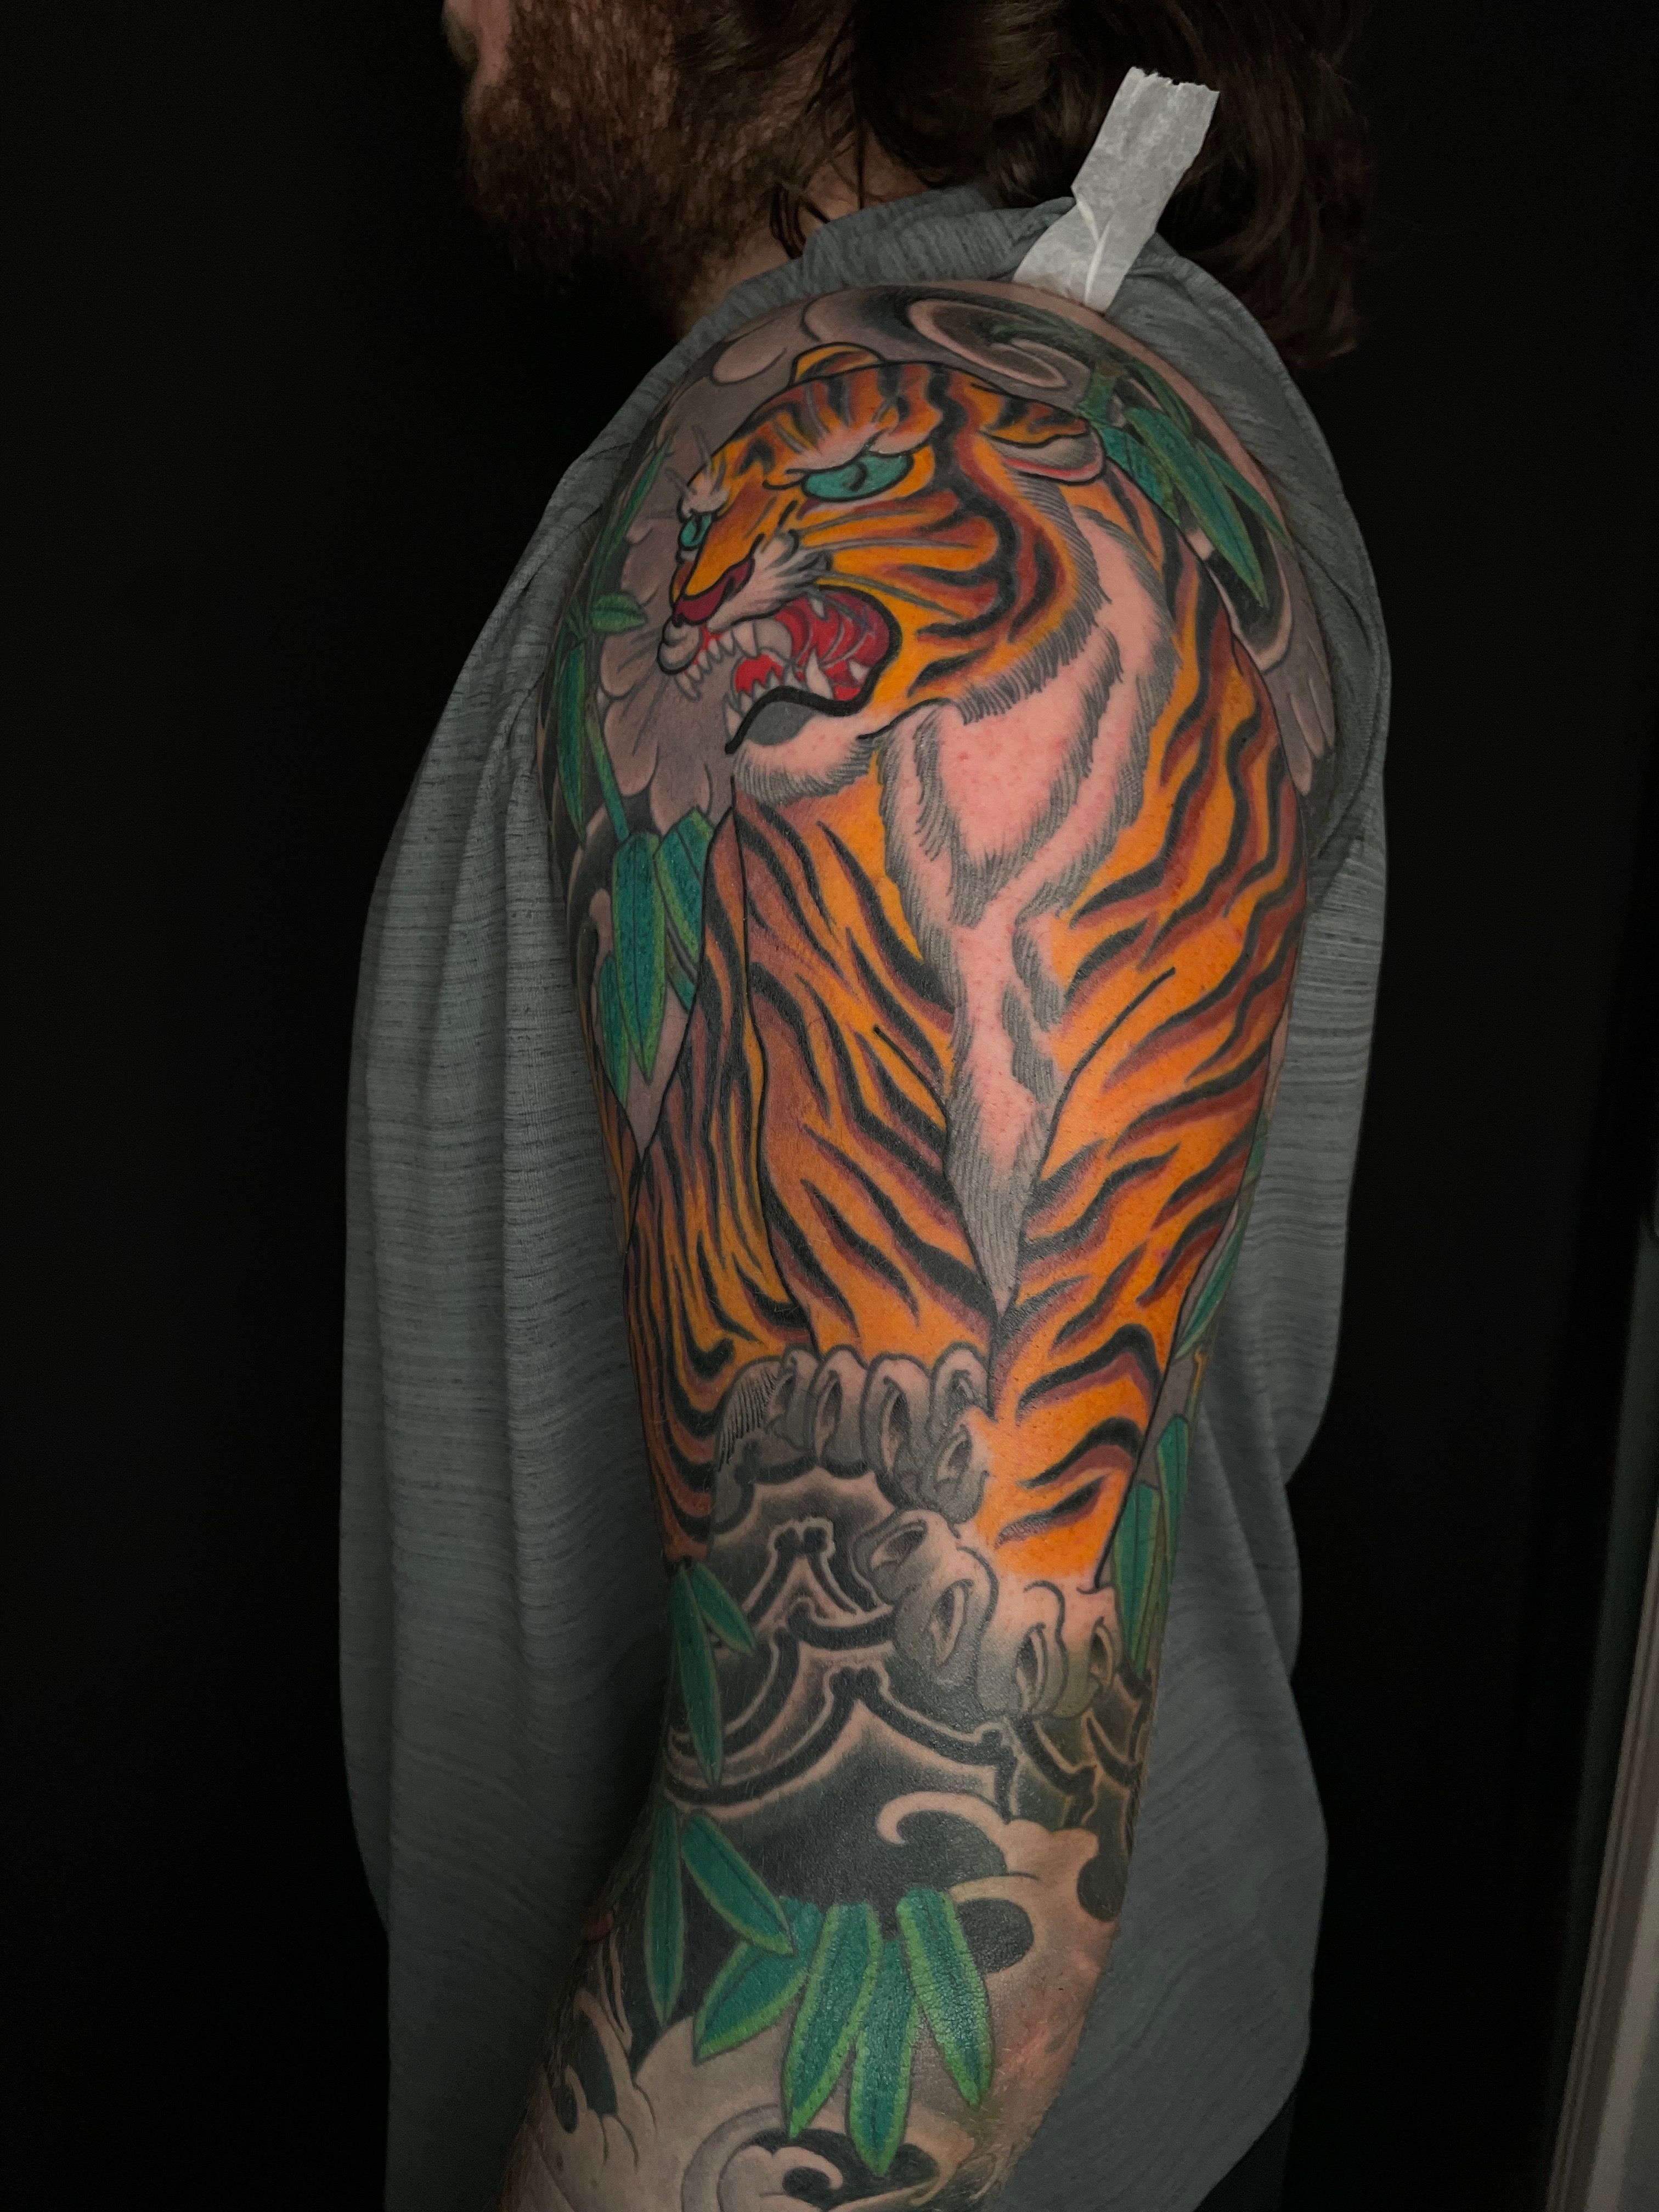 105 Mind-Blowing Tiger Tattoos And Their Meaning - AuthorityTattoo